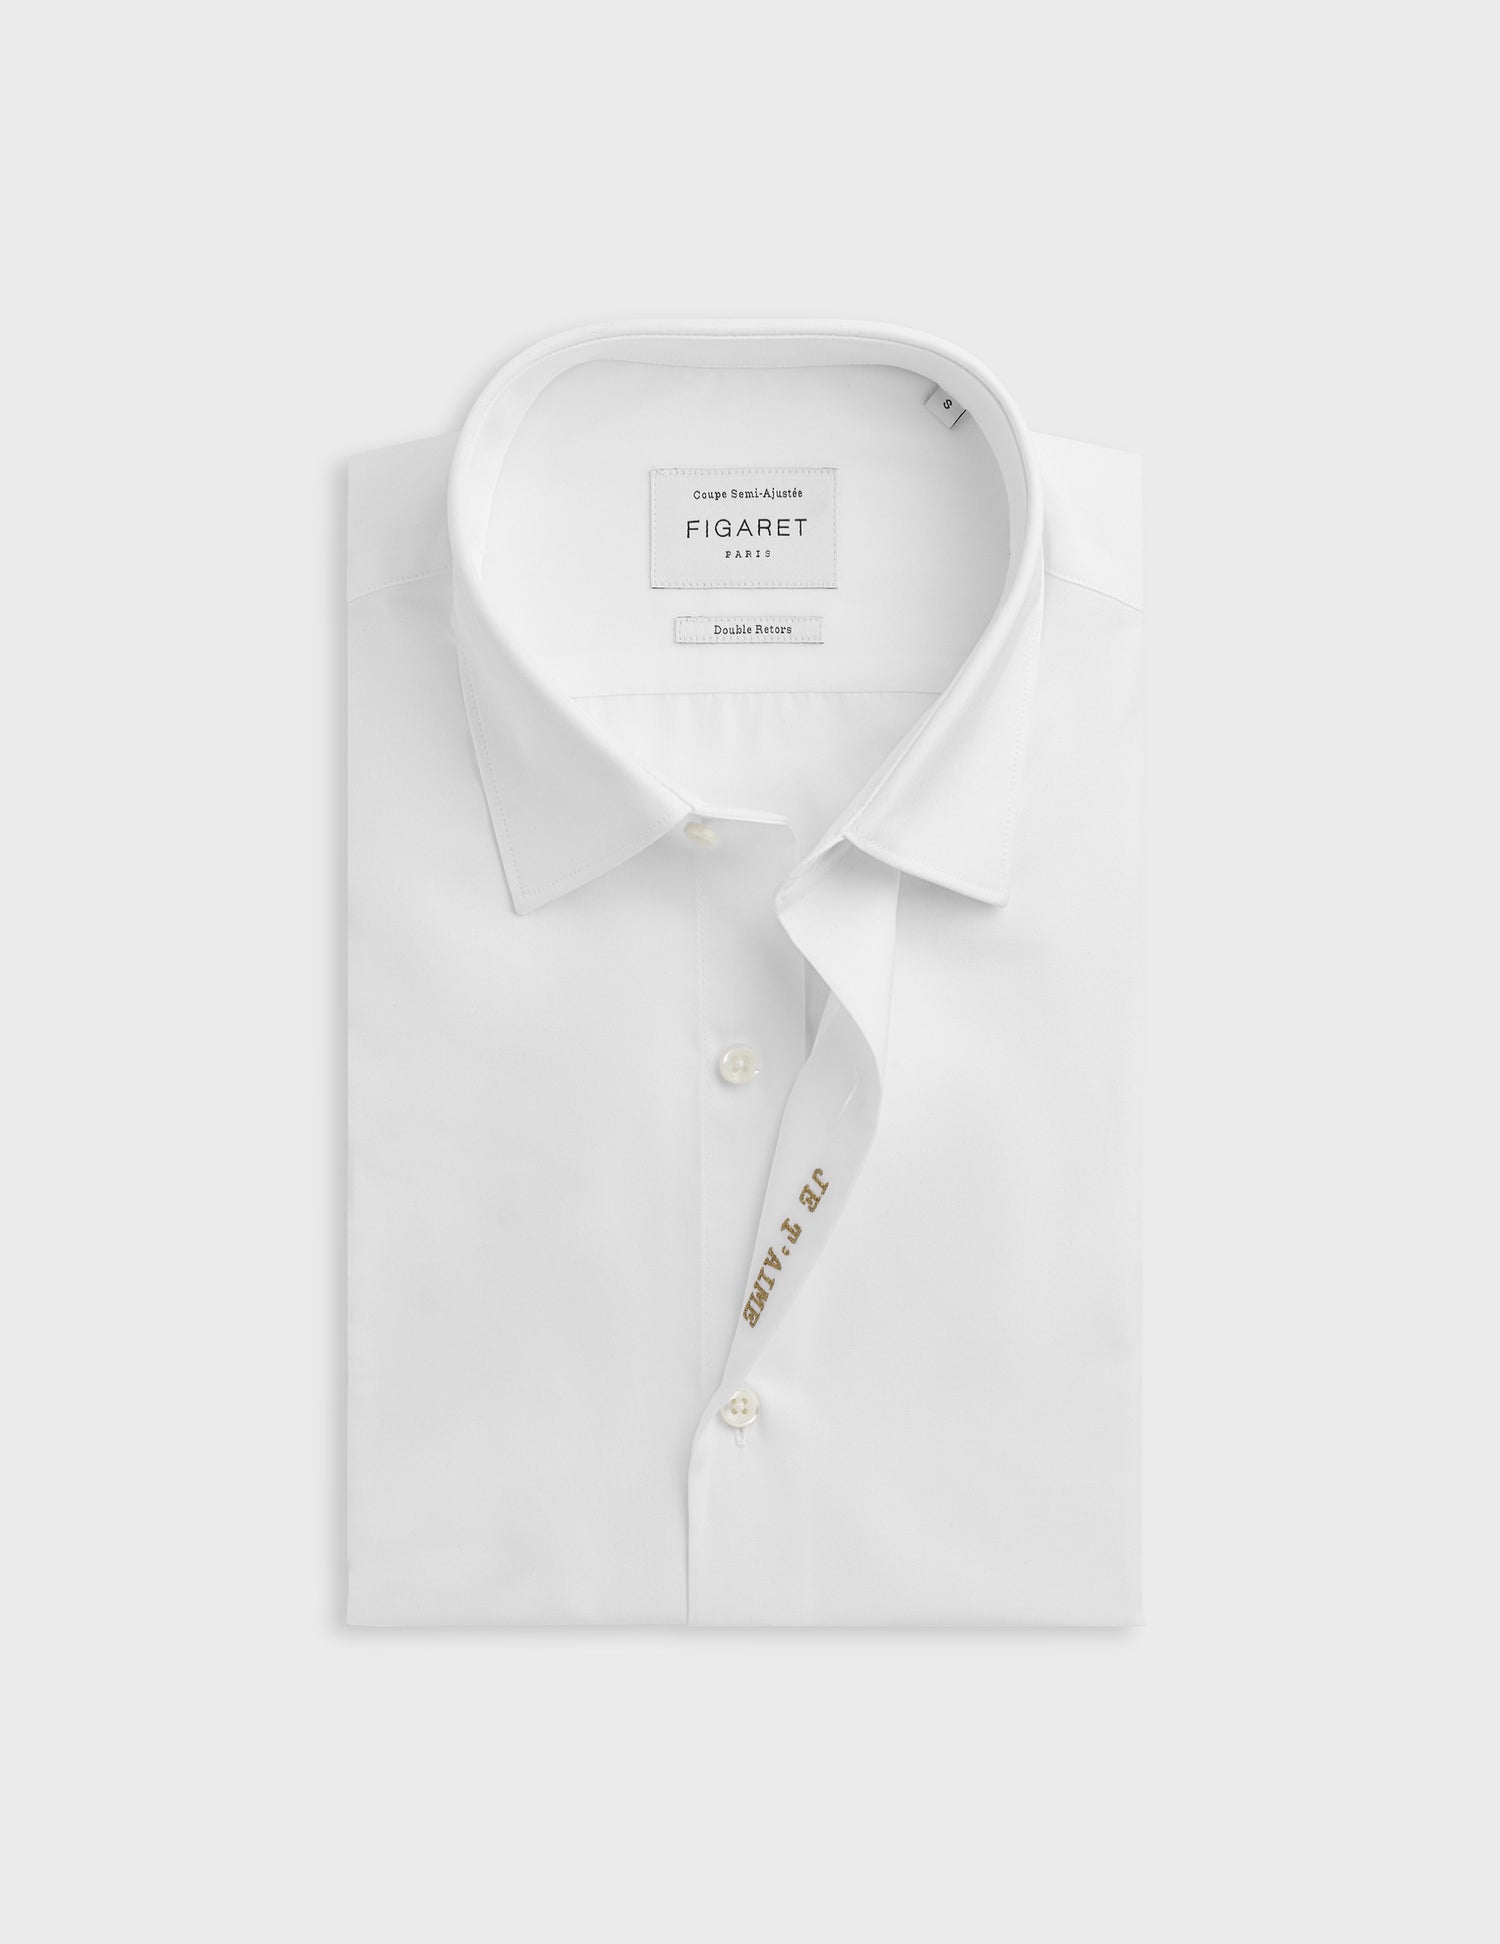 White "Je t'aime" shirt with gold embroidery - Poplin - Figaret Collar#9